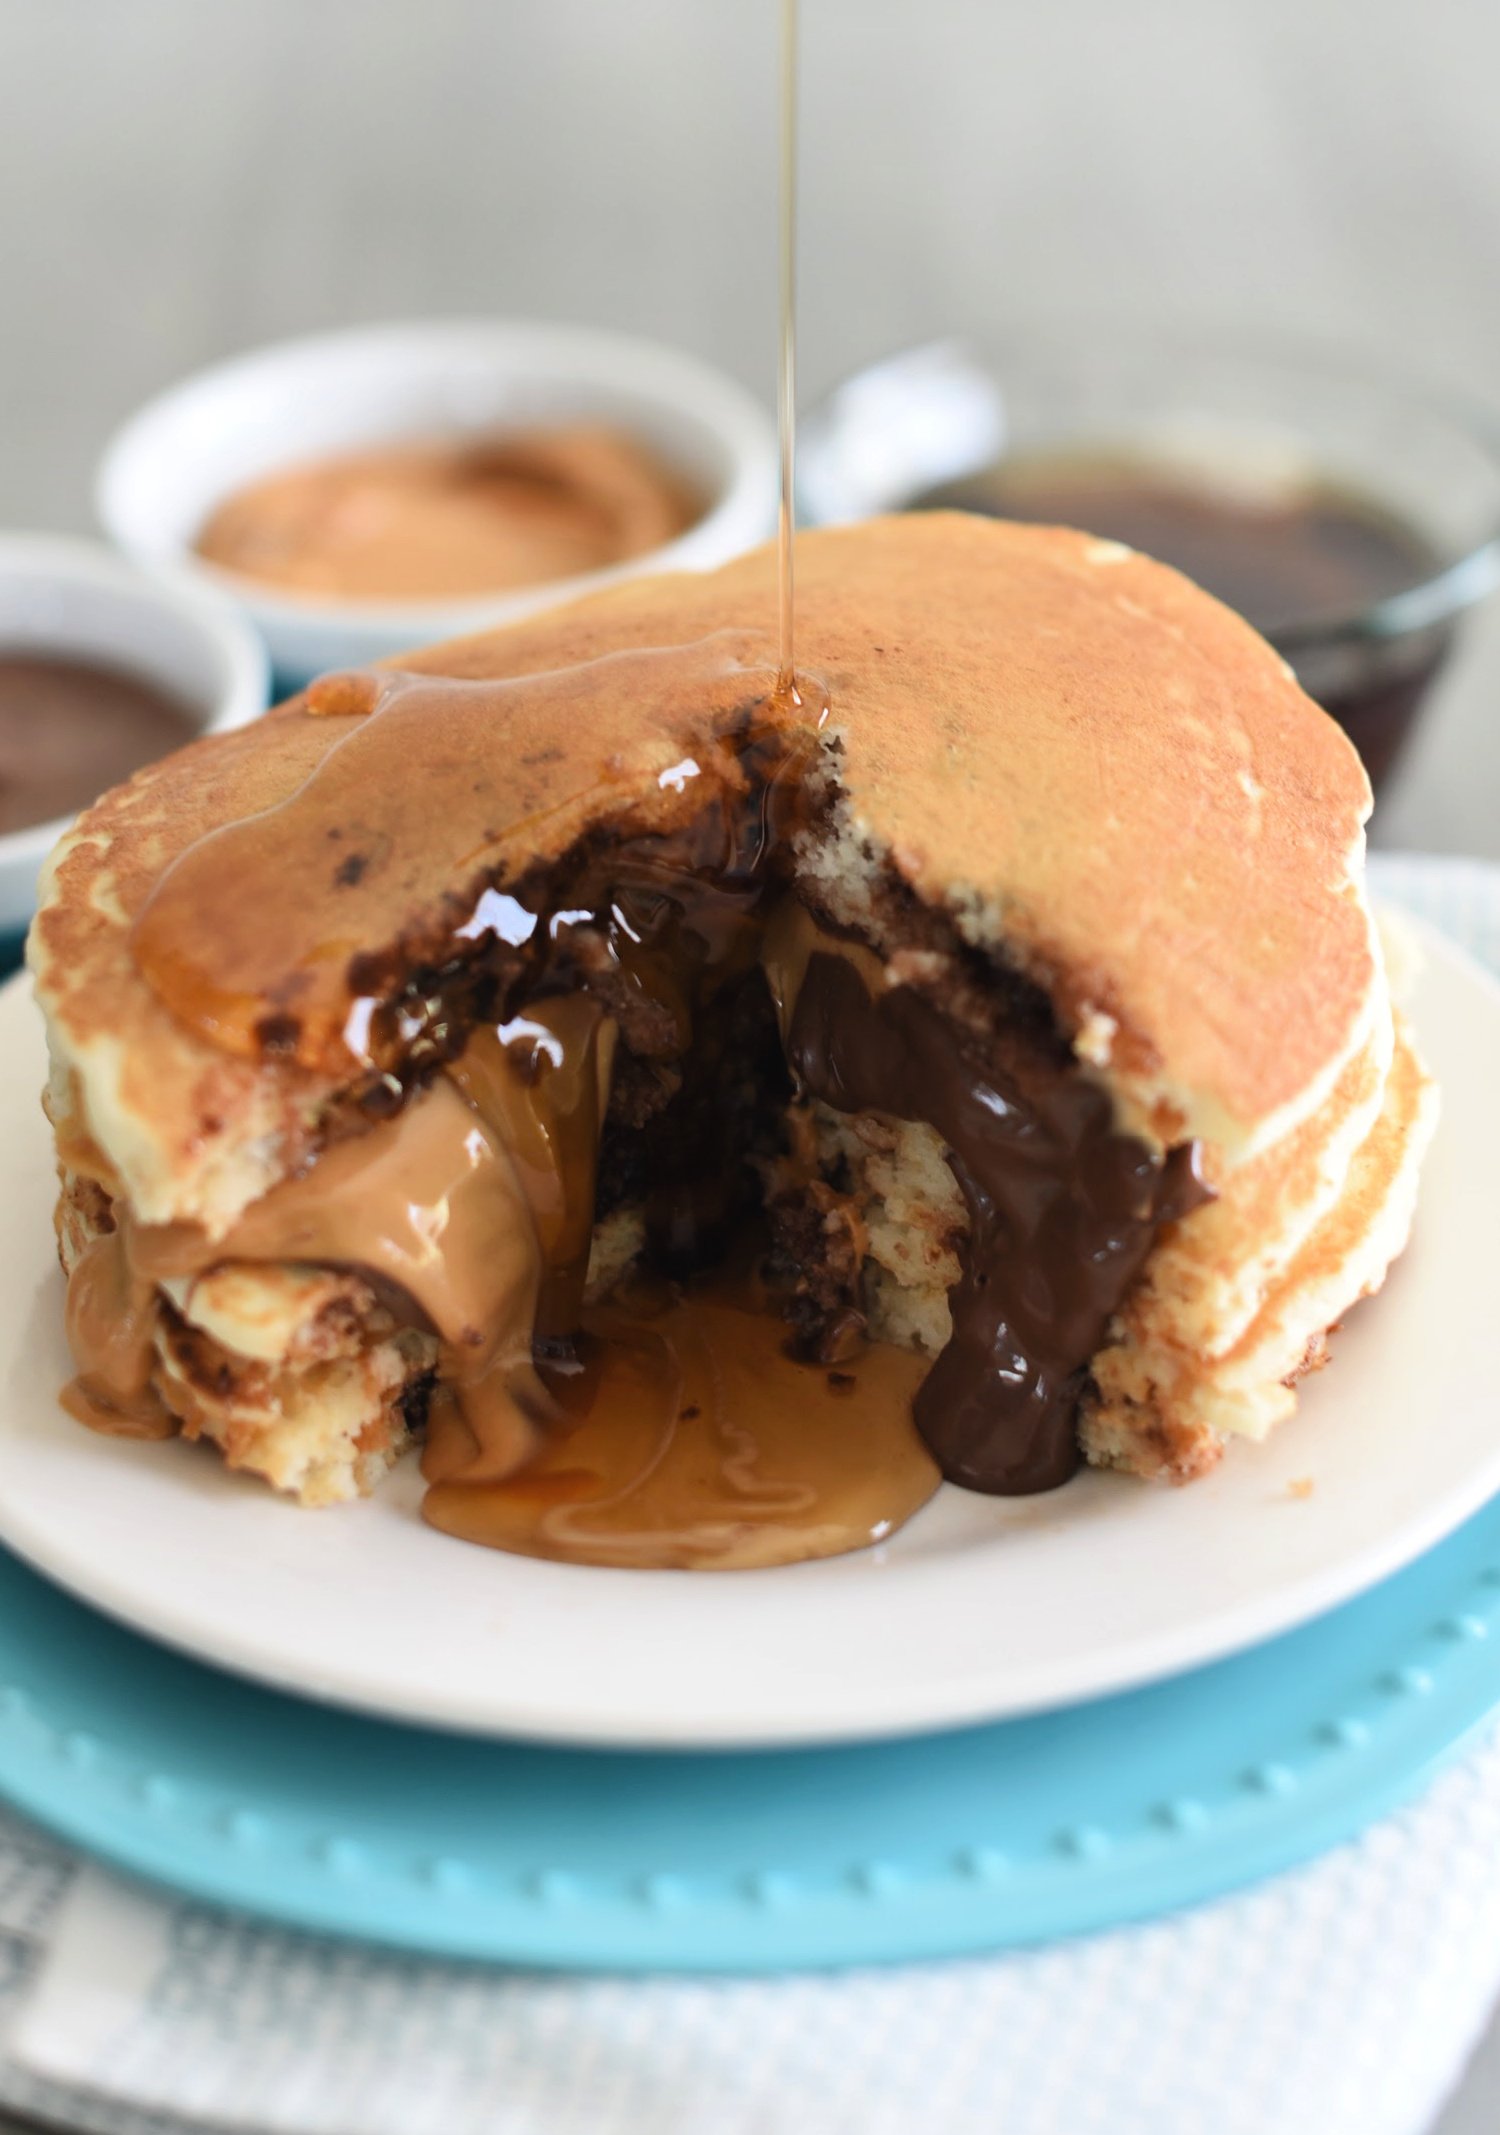 Nutella and Peanut Butter Stuffed Pancakes-Your family will go wild for this easy to make breakfast